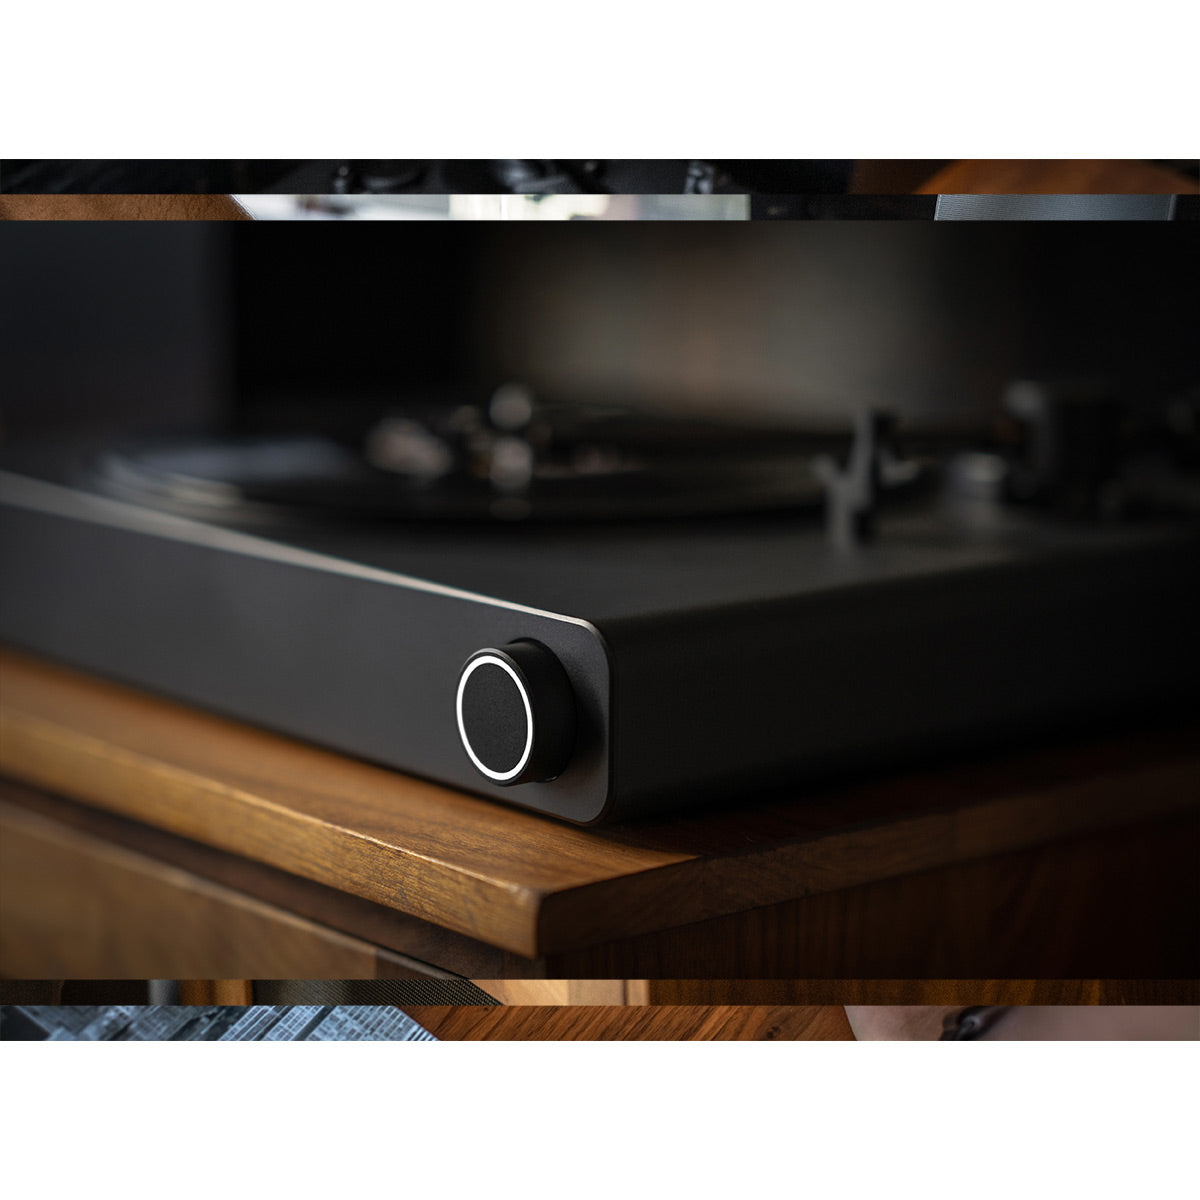 Sony Bluetooth Pre-Amp Turntable PS-LX310BT Unboxing assembly and review  test 